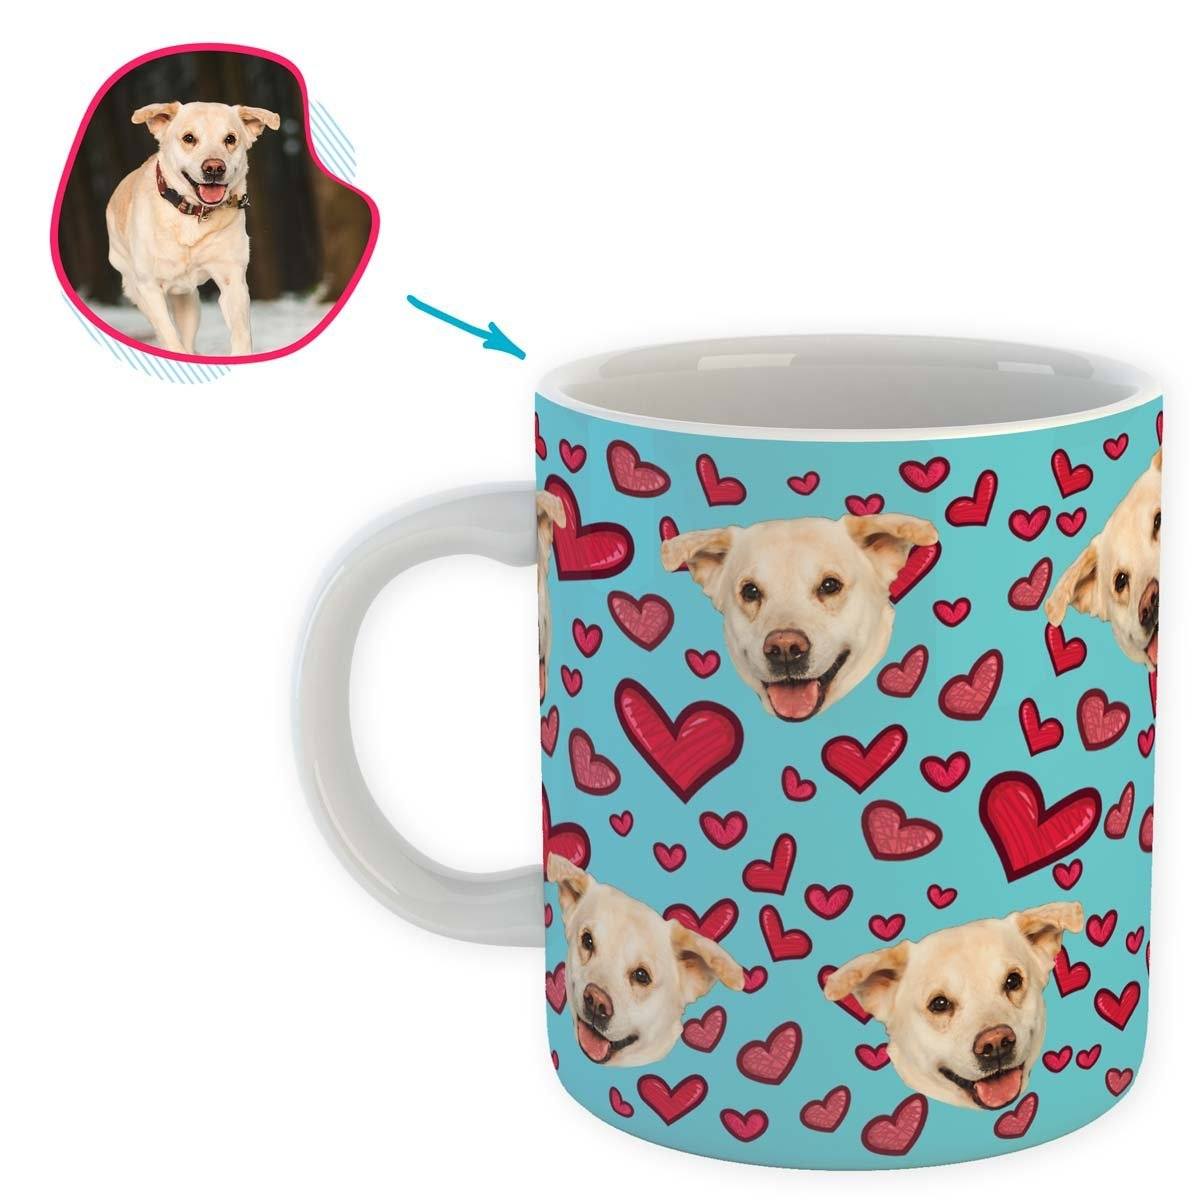 blue Heart mug personalized with photo of face printed on it